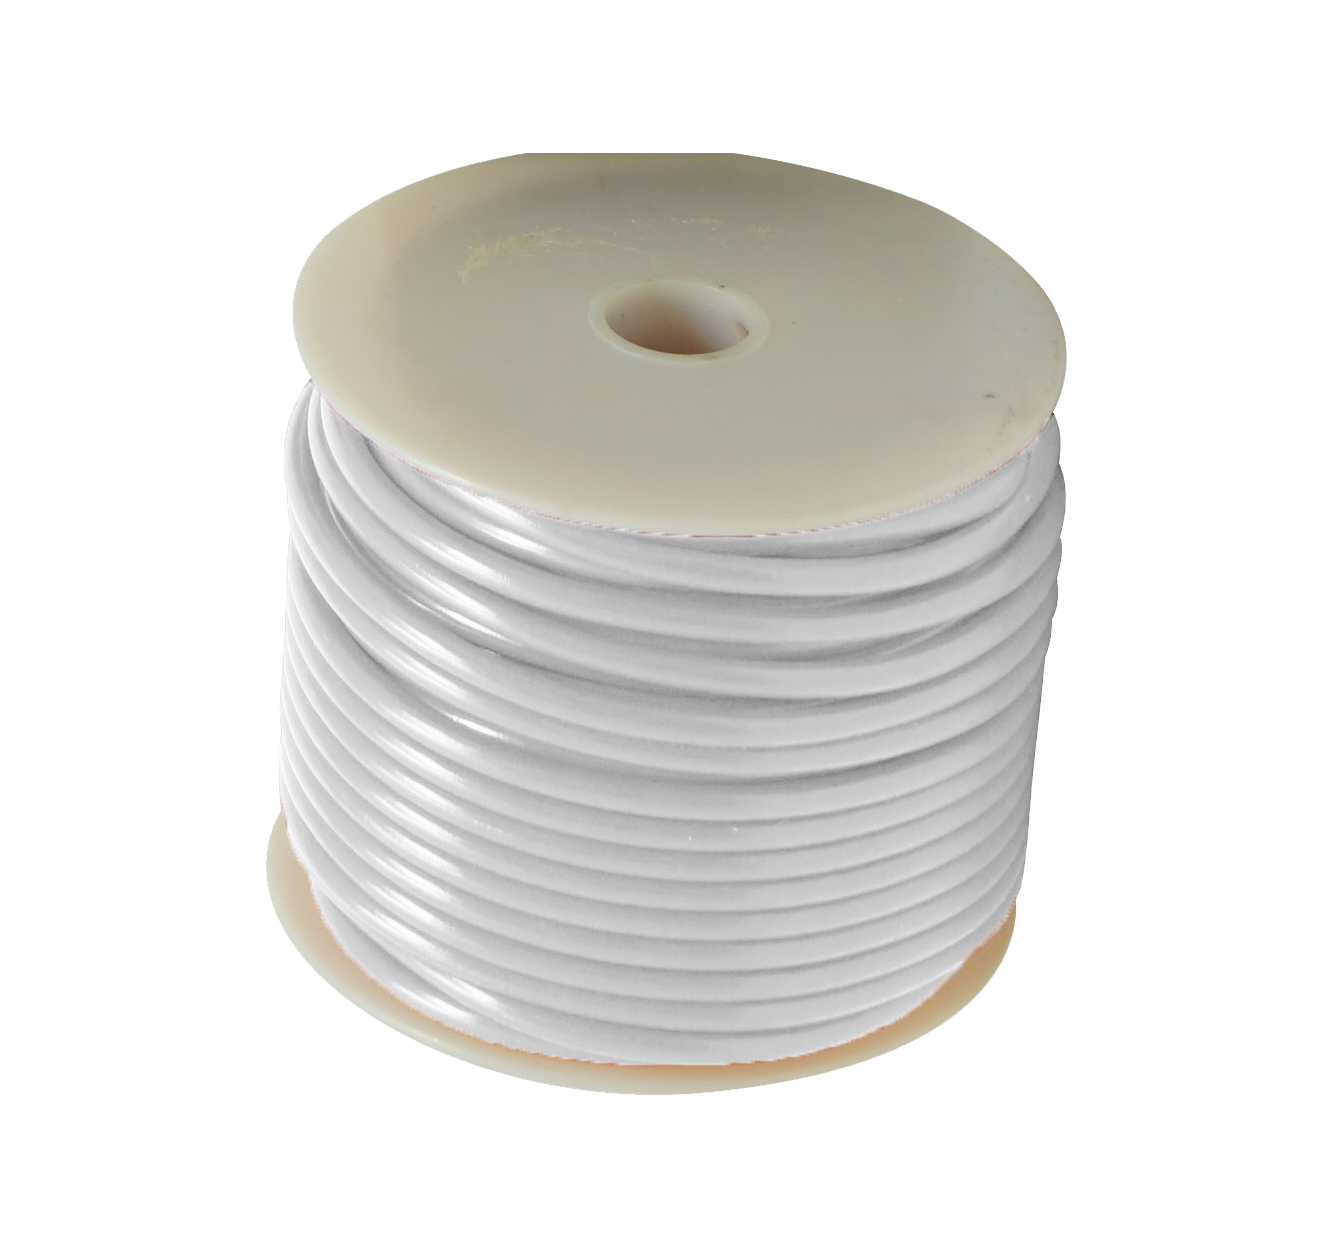 Southwire 55669023 Primary Wire; 14-Gauge Bulk Spool; 100-Feet; White. -  Electrical Wires 